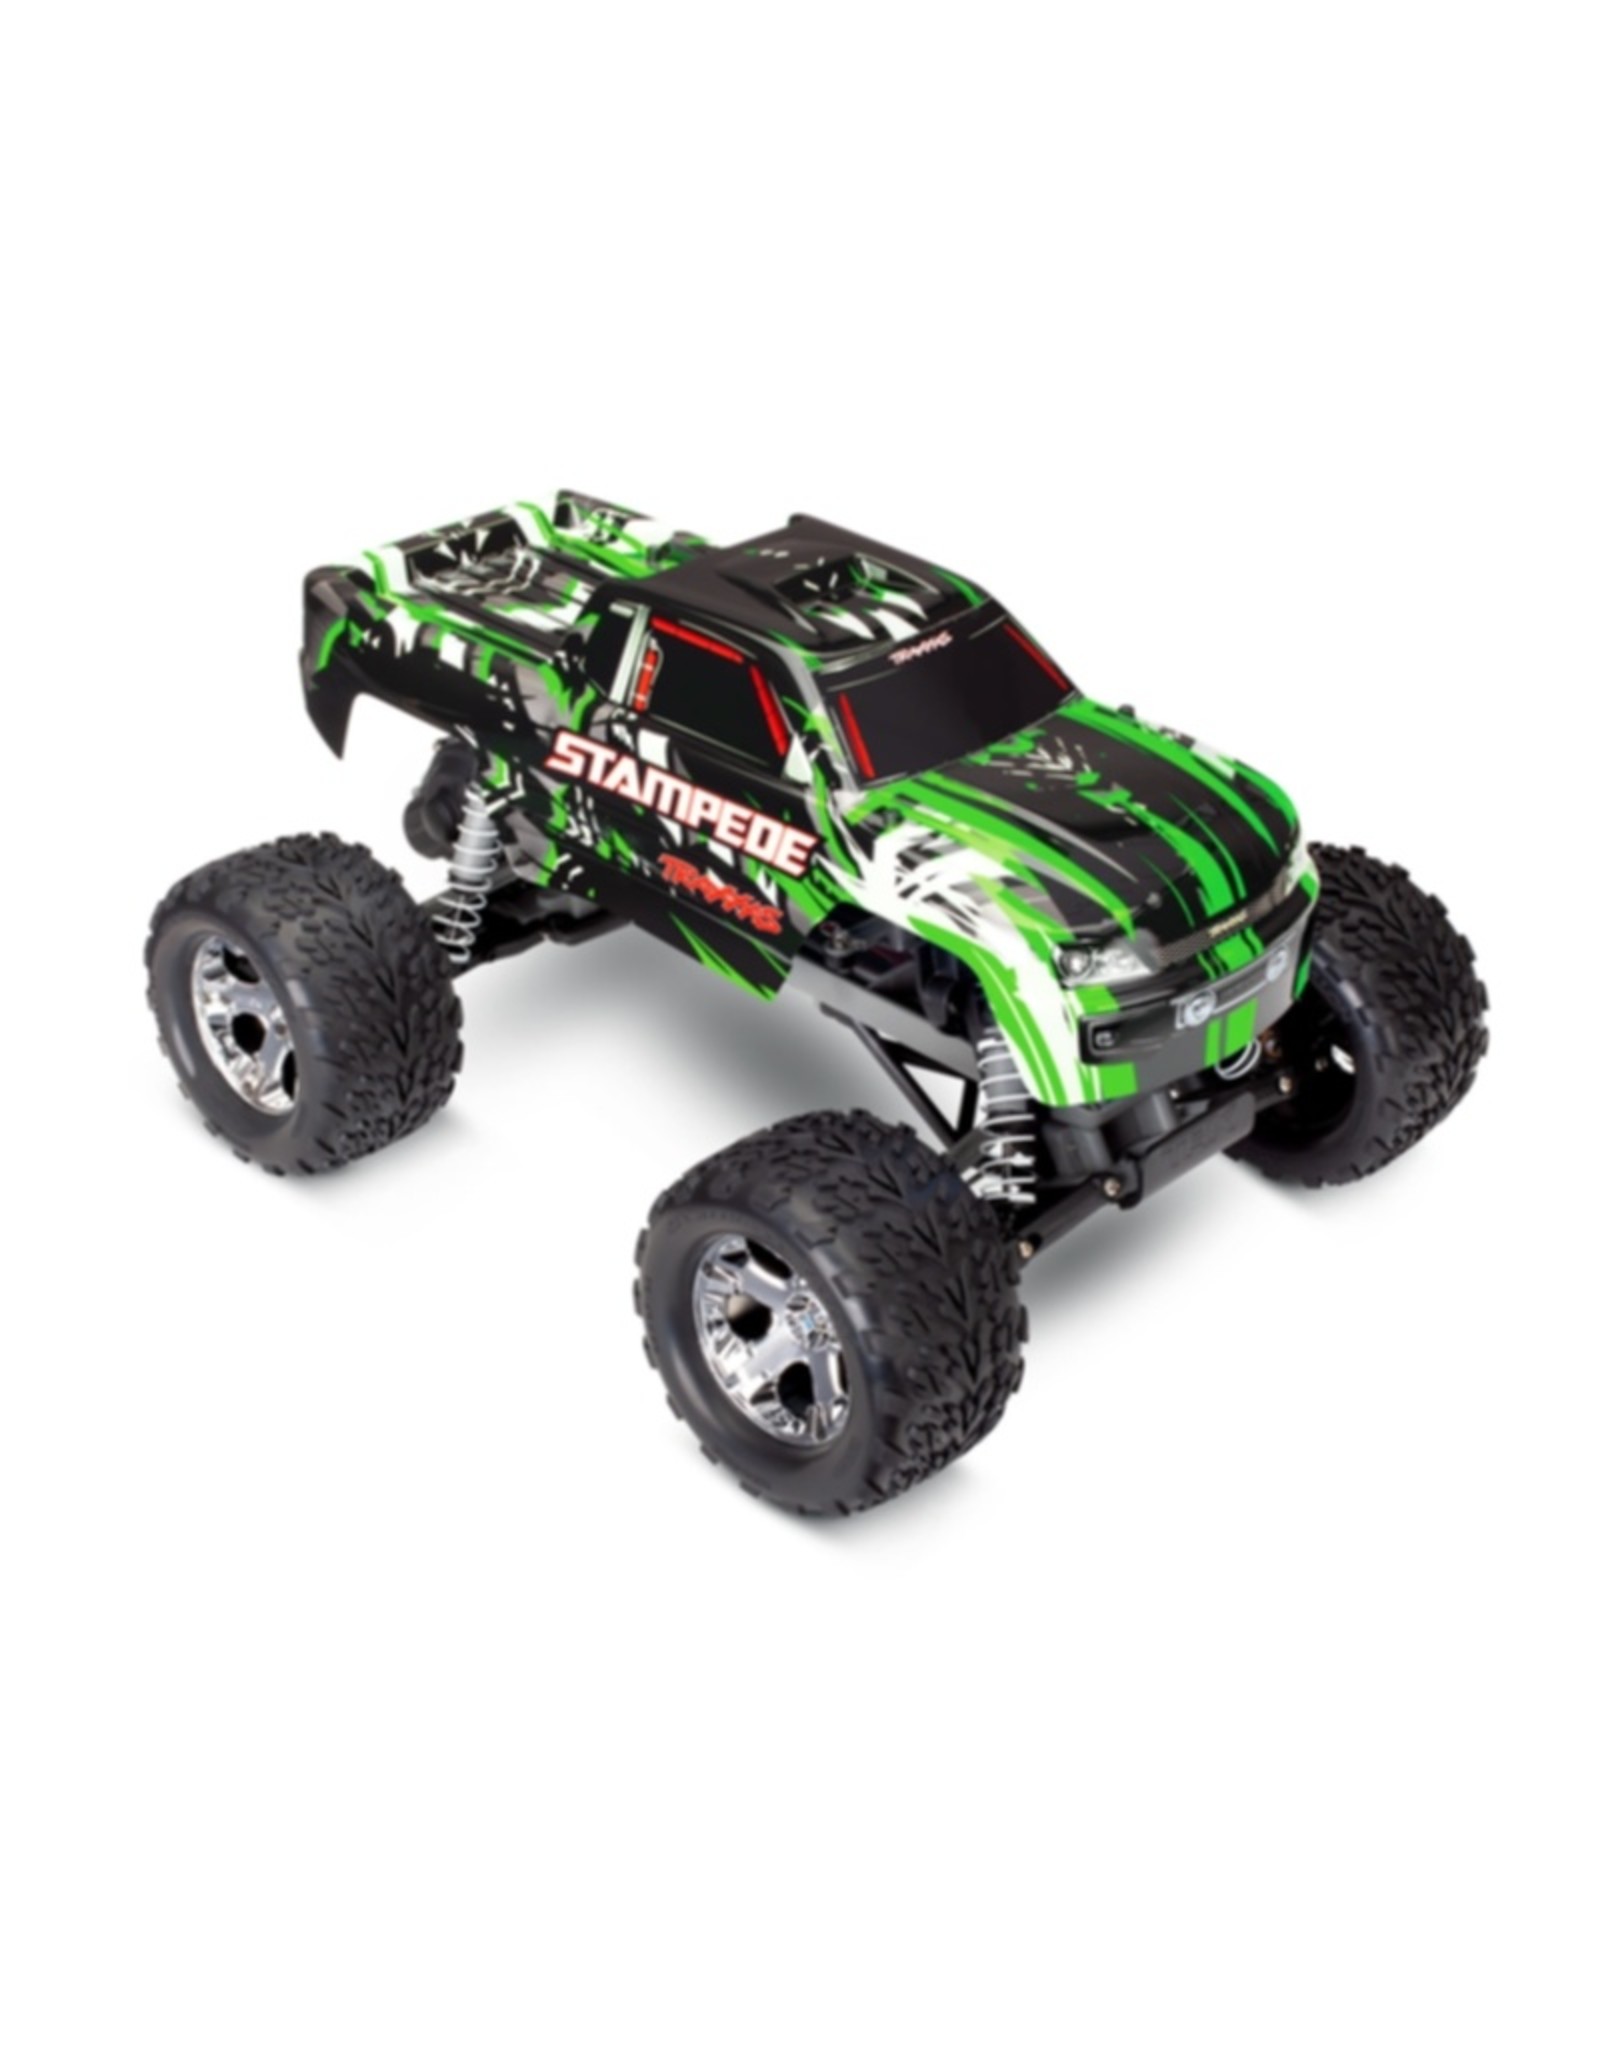 Traxxas TRA36054-4 GREEN Stampede : 1/10 Scale Monster Truck (Battery & DC Charger NOT Included)